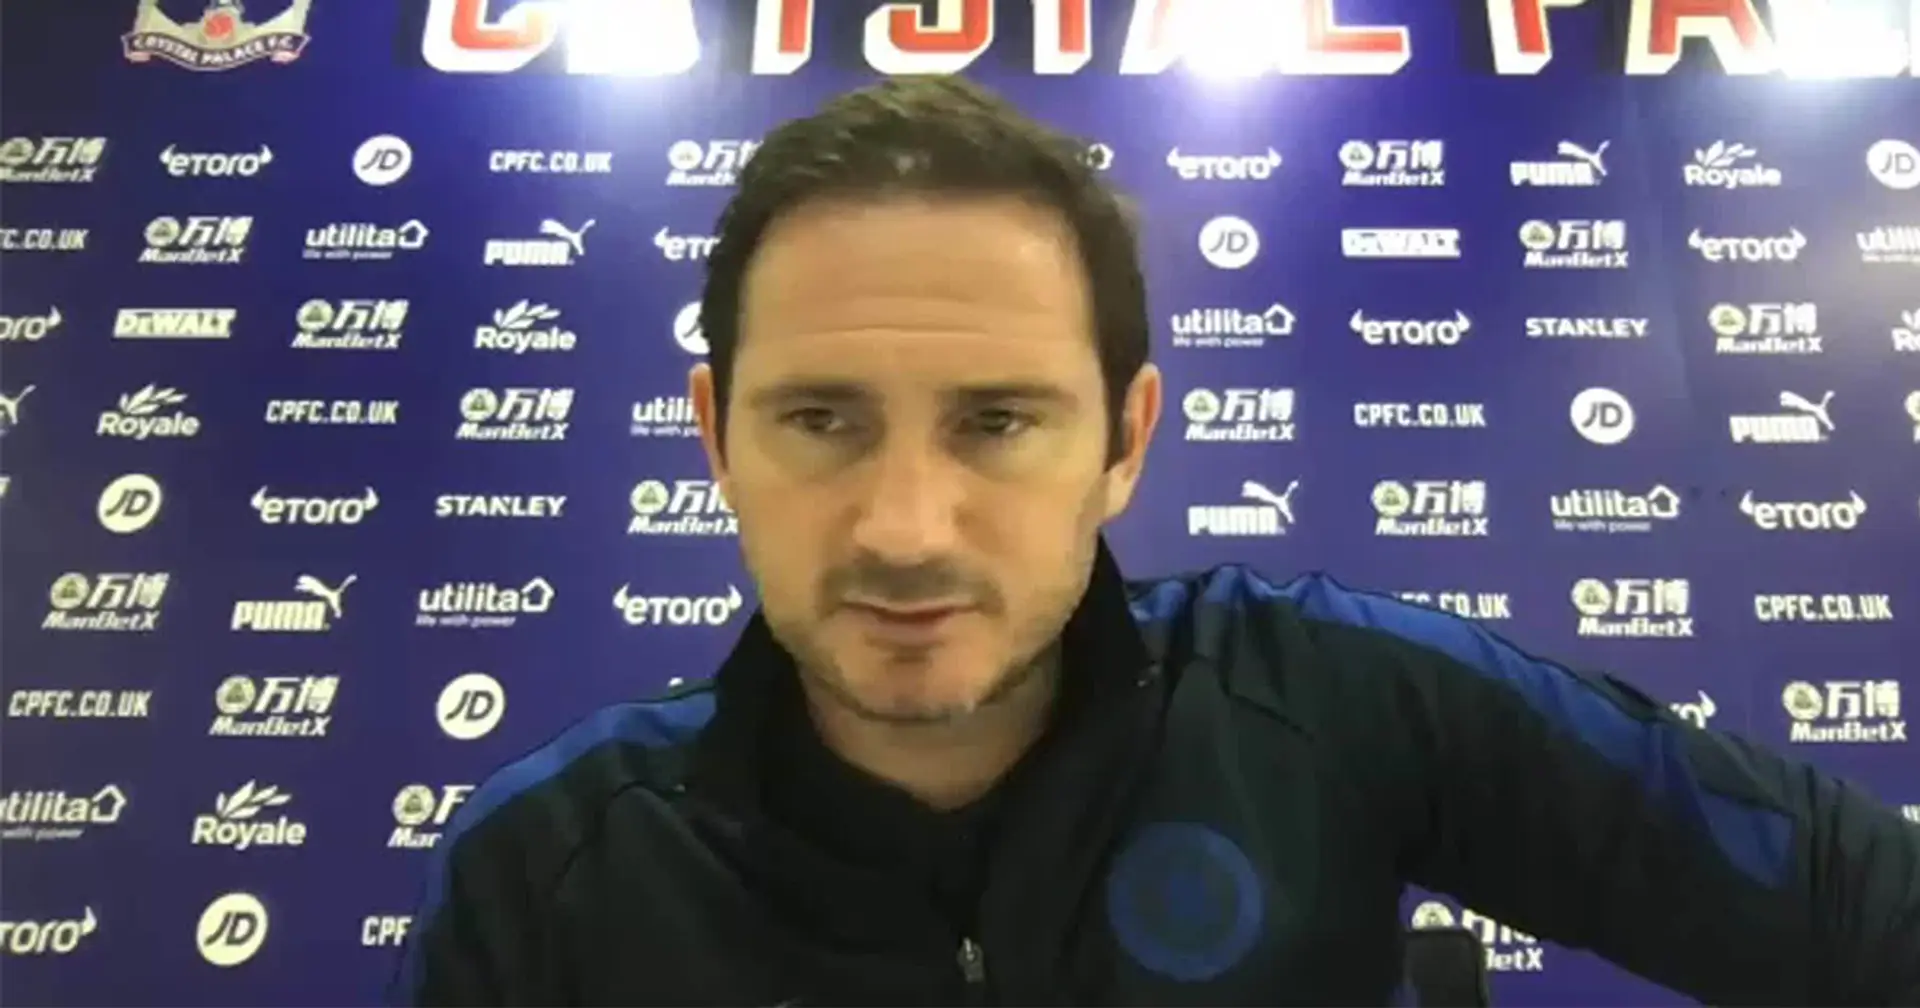 'You can’t keep winning or feel secure': Lampard names 2 biggest issues in nervy Palace win